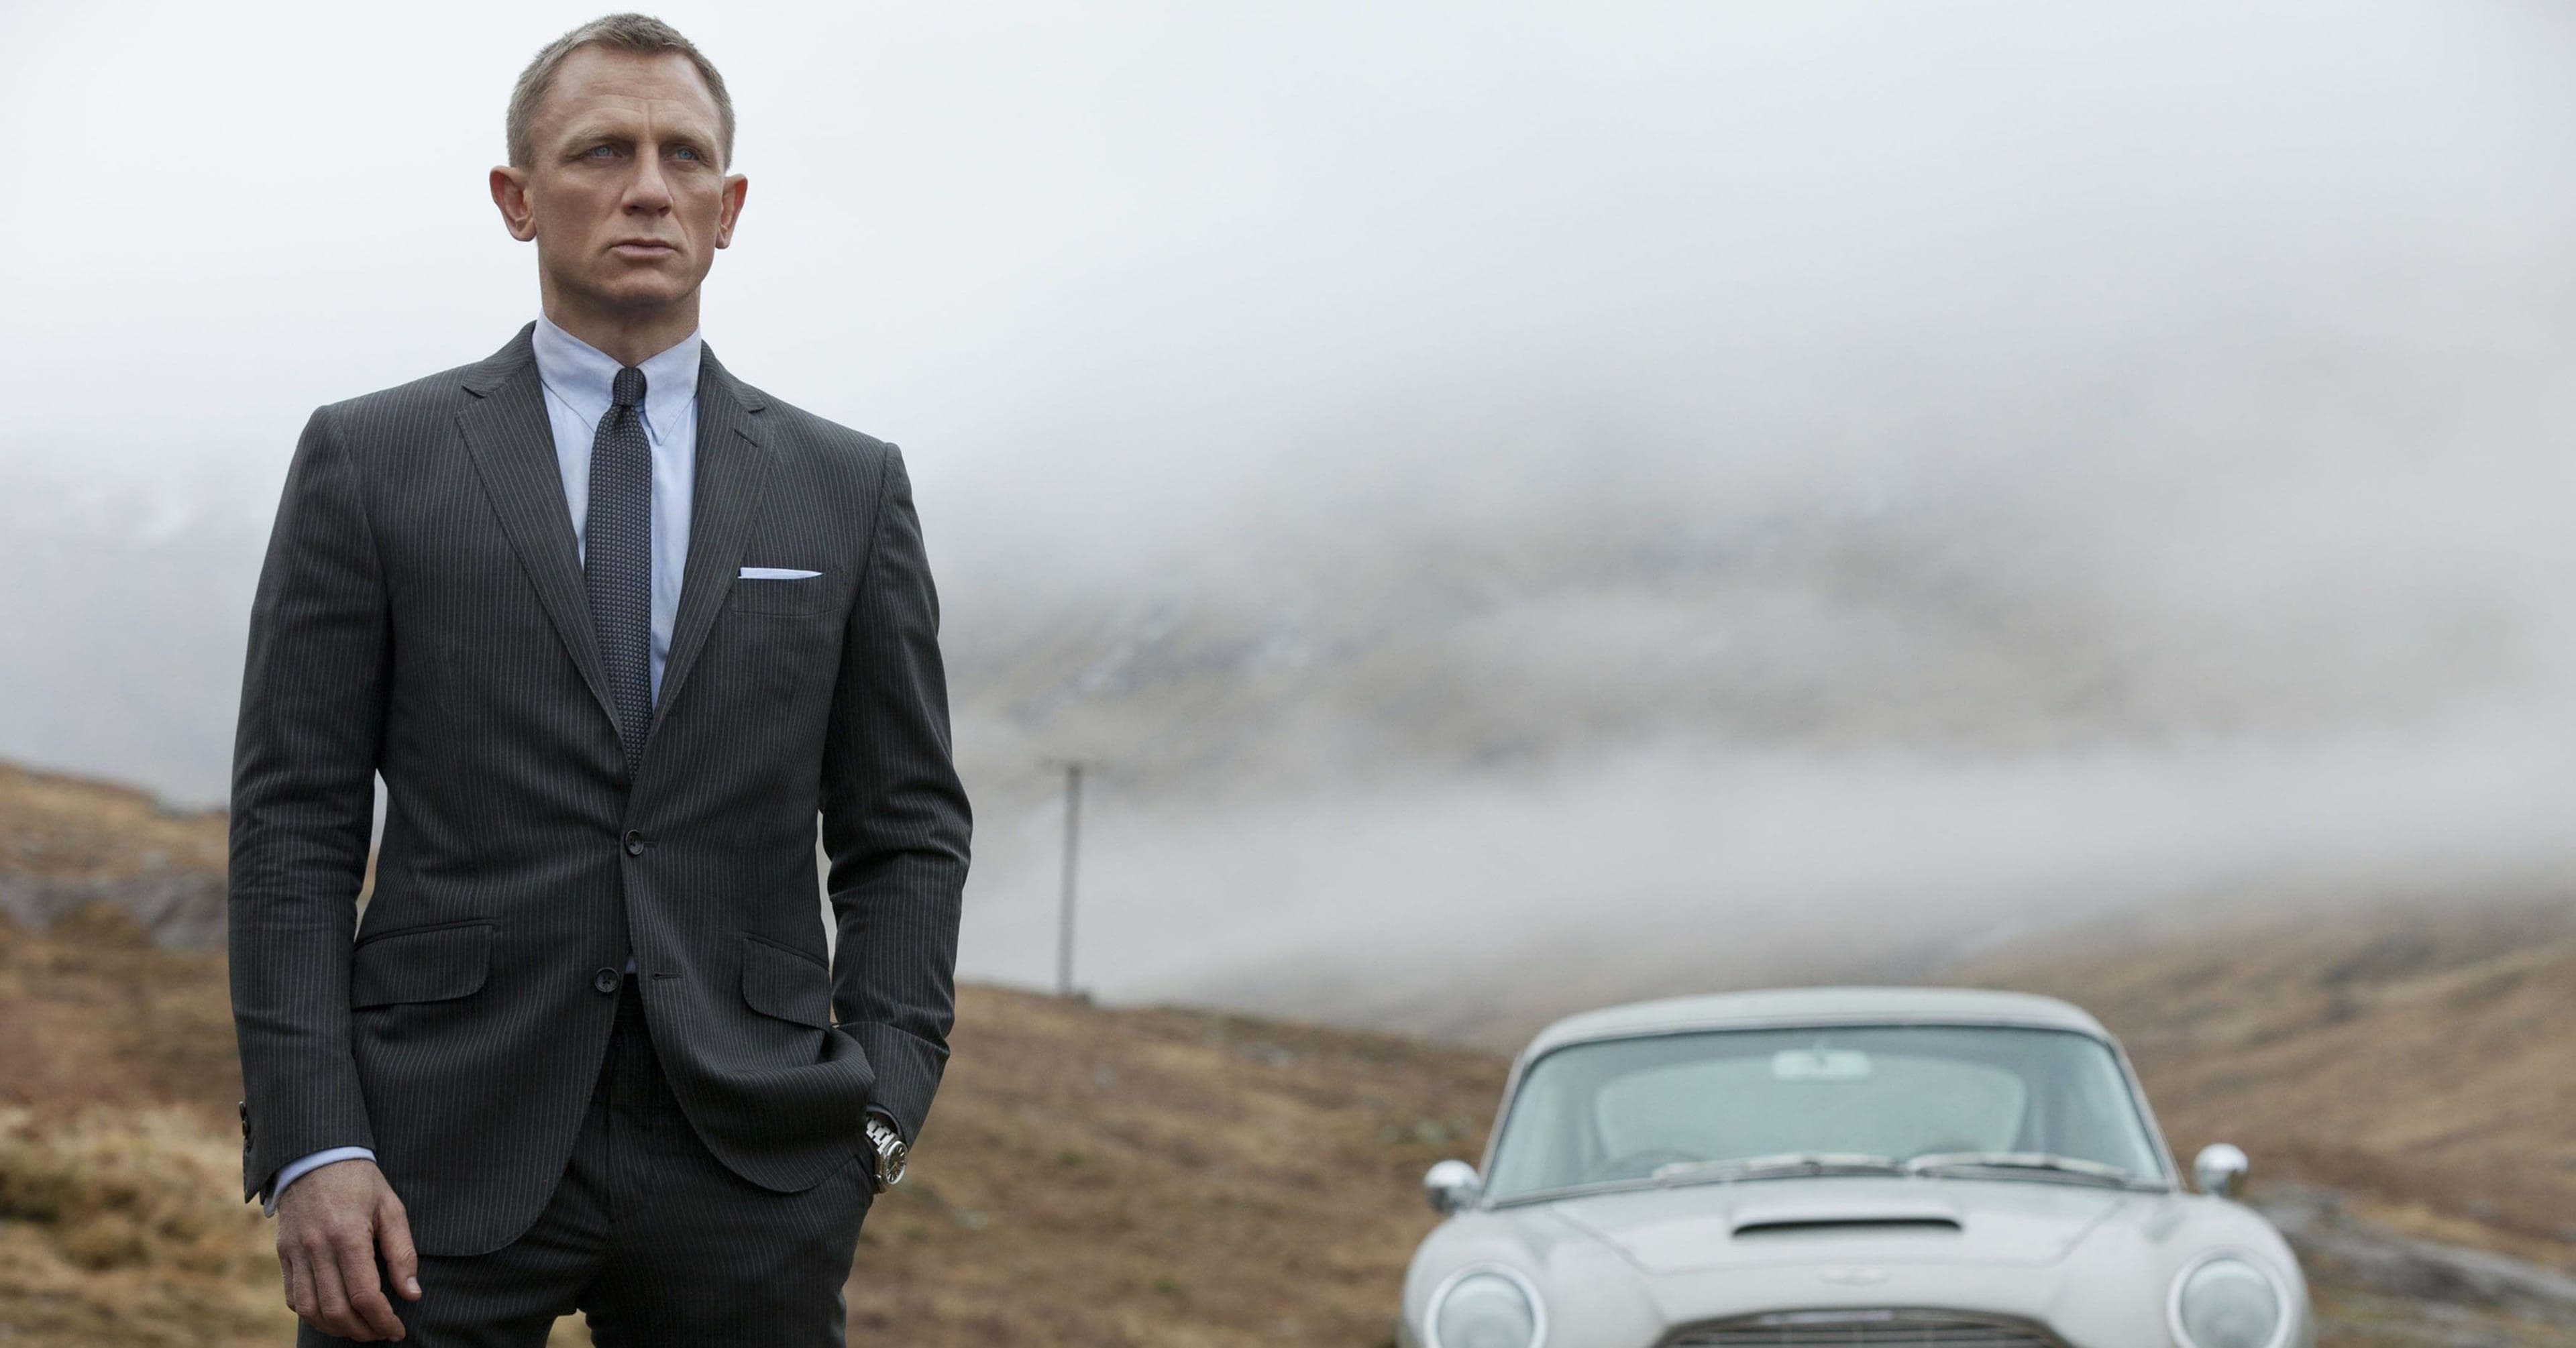 List Of All 'James Bond' Movies, Ranked Best To Worst